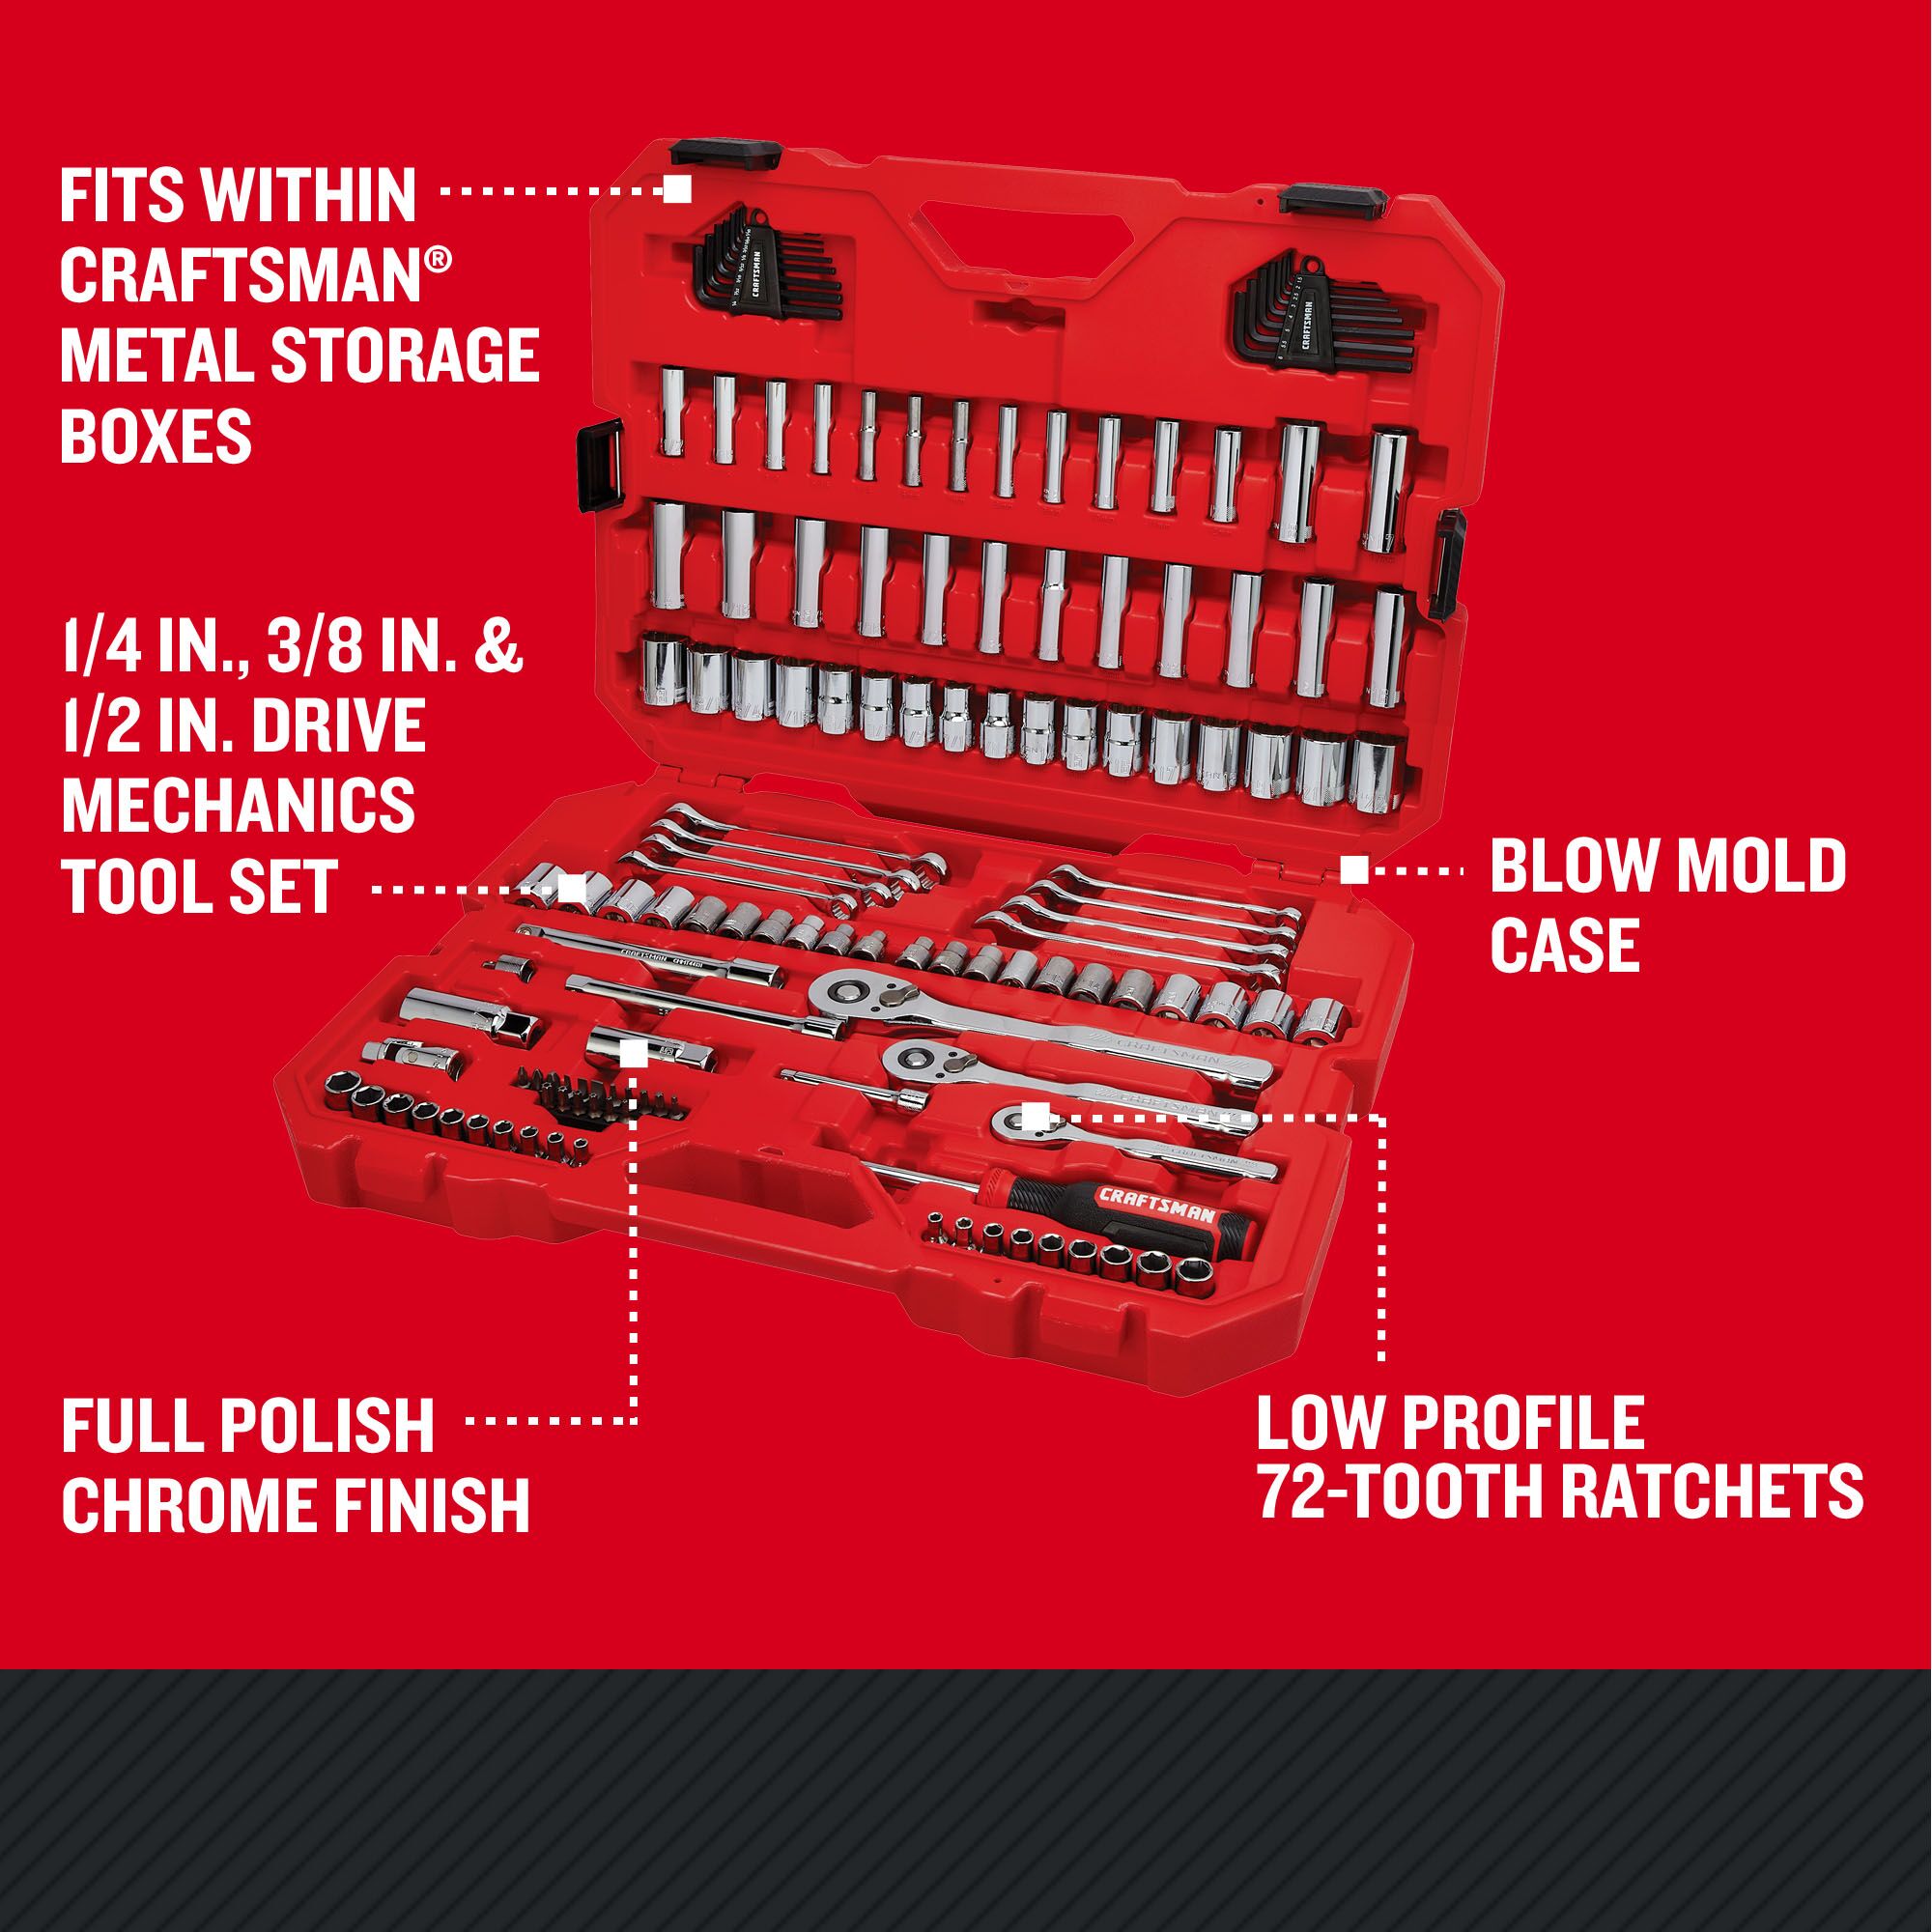 CRAFTSMAN Low Profile 135 piece MECHANICS TOOL SET with features and benefits highlighted